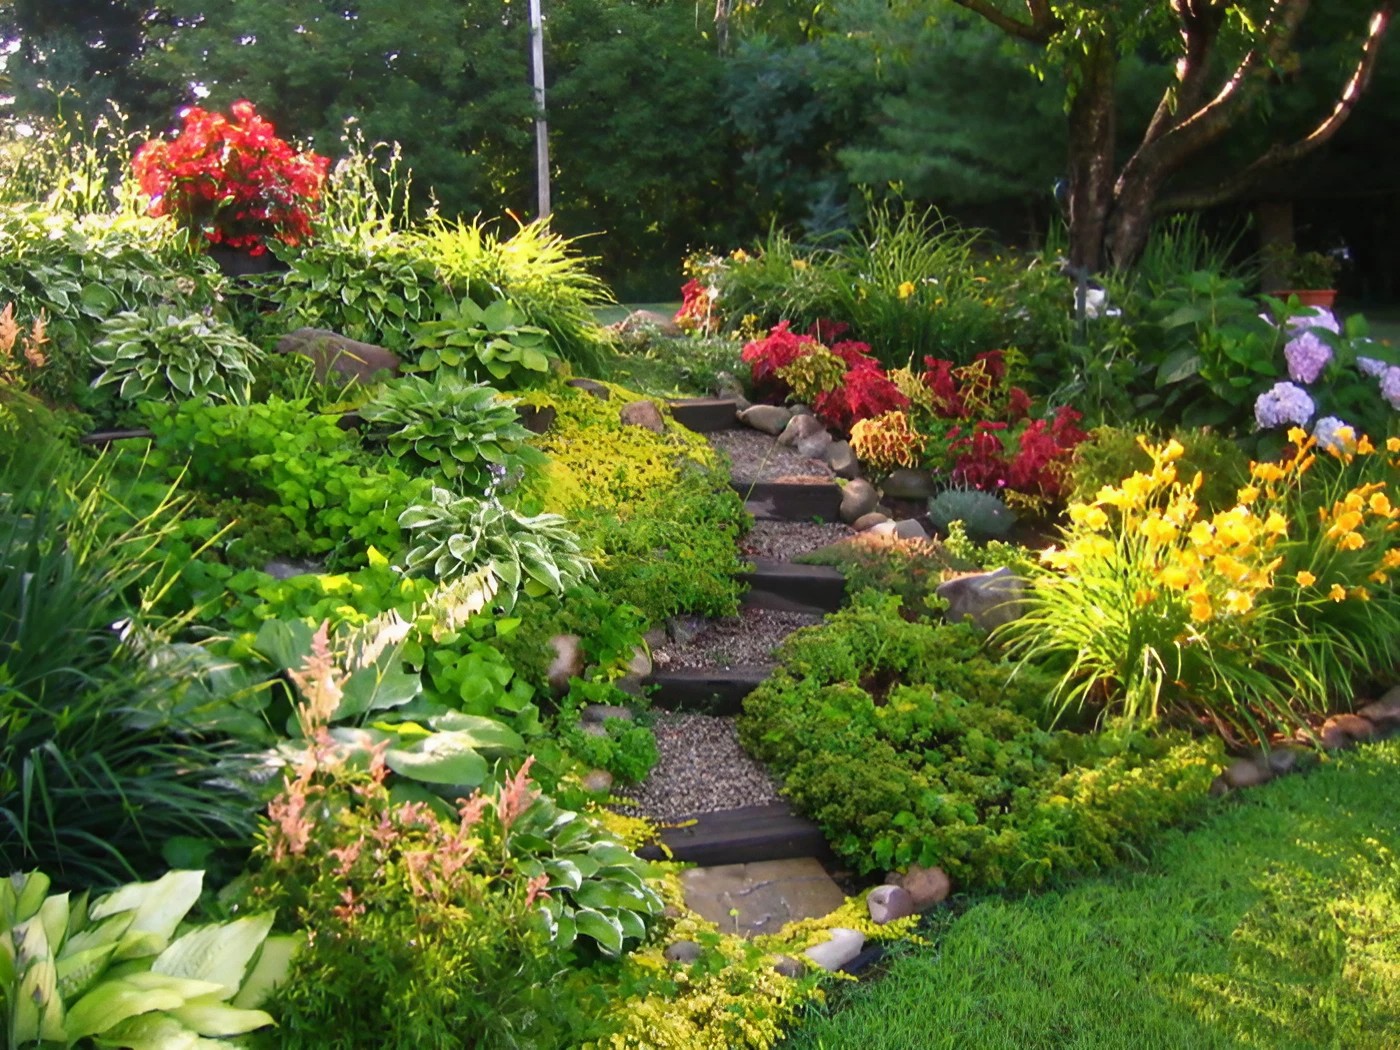 Aesthetically pleasing garden with a stone path winding through vibrant flowers.